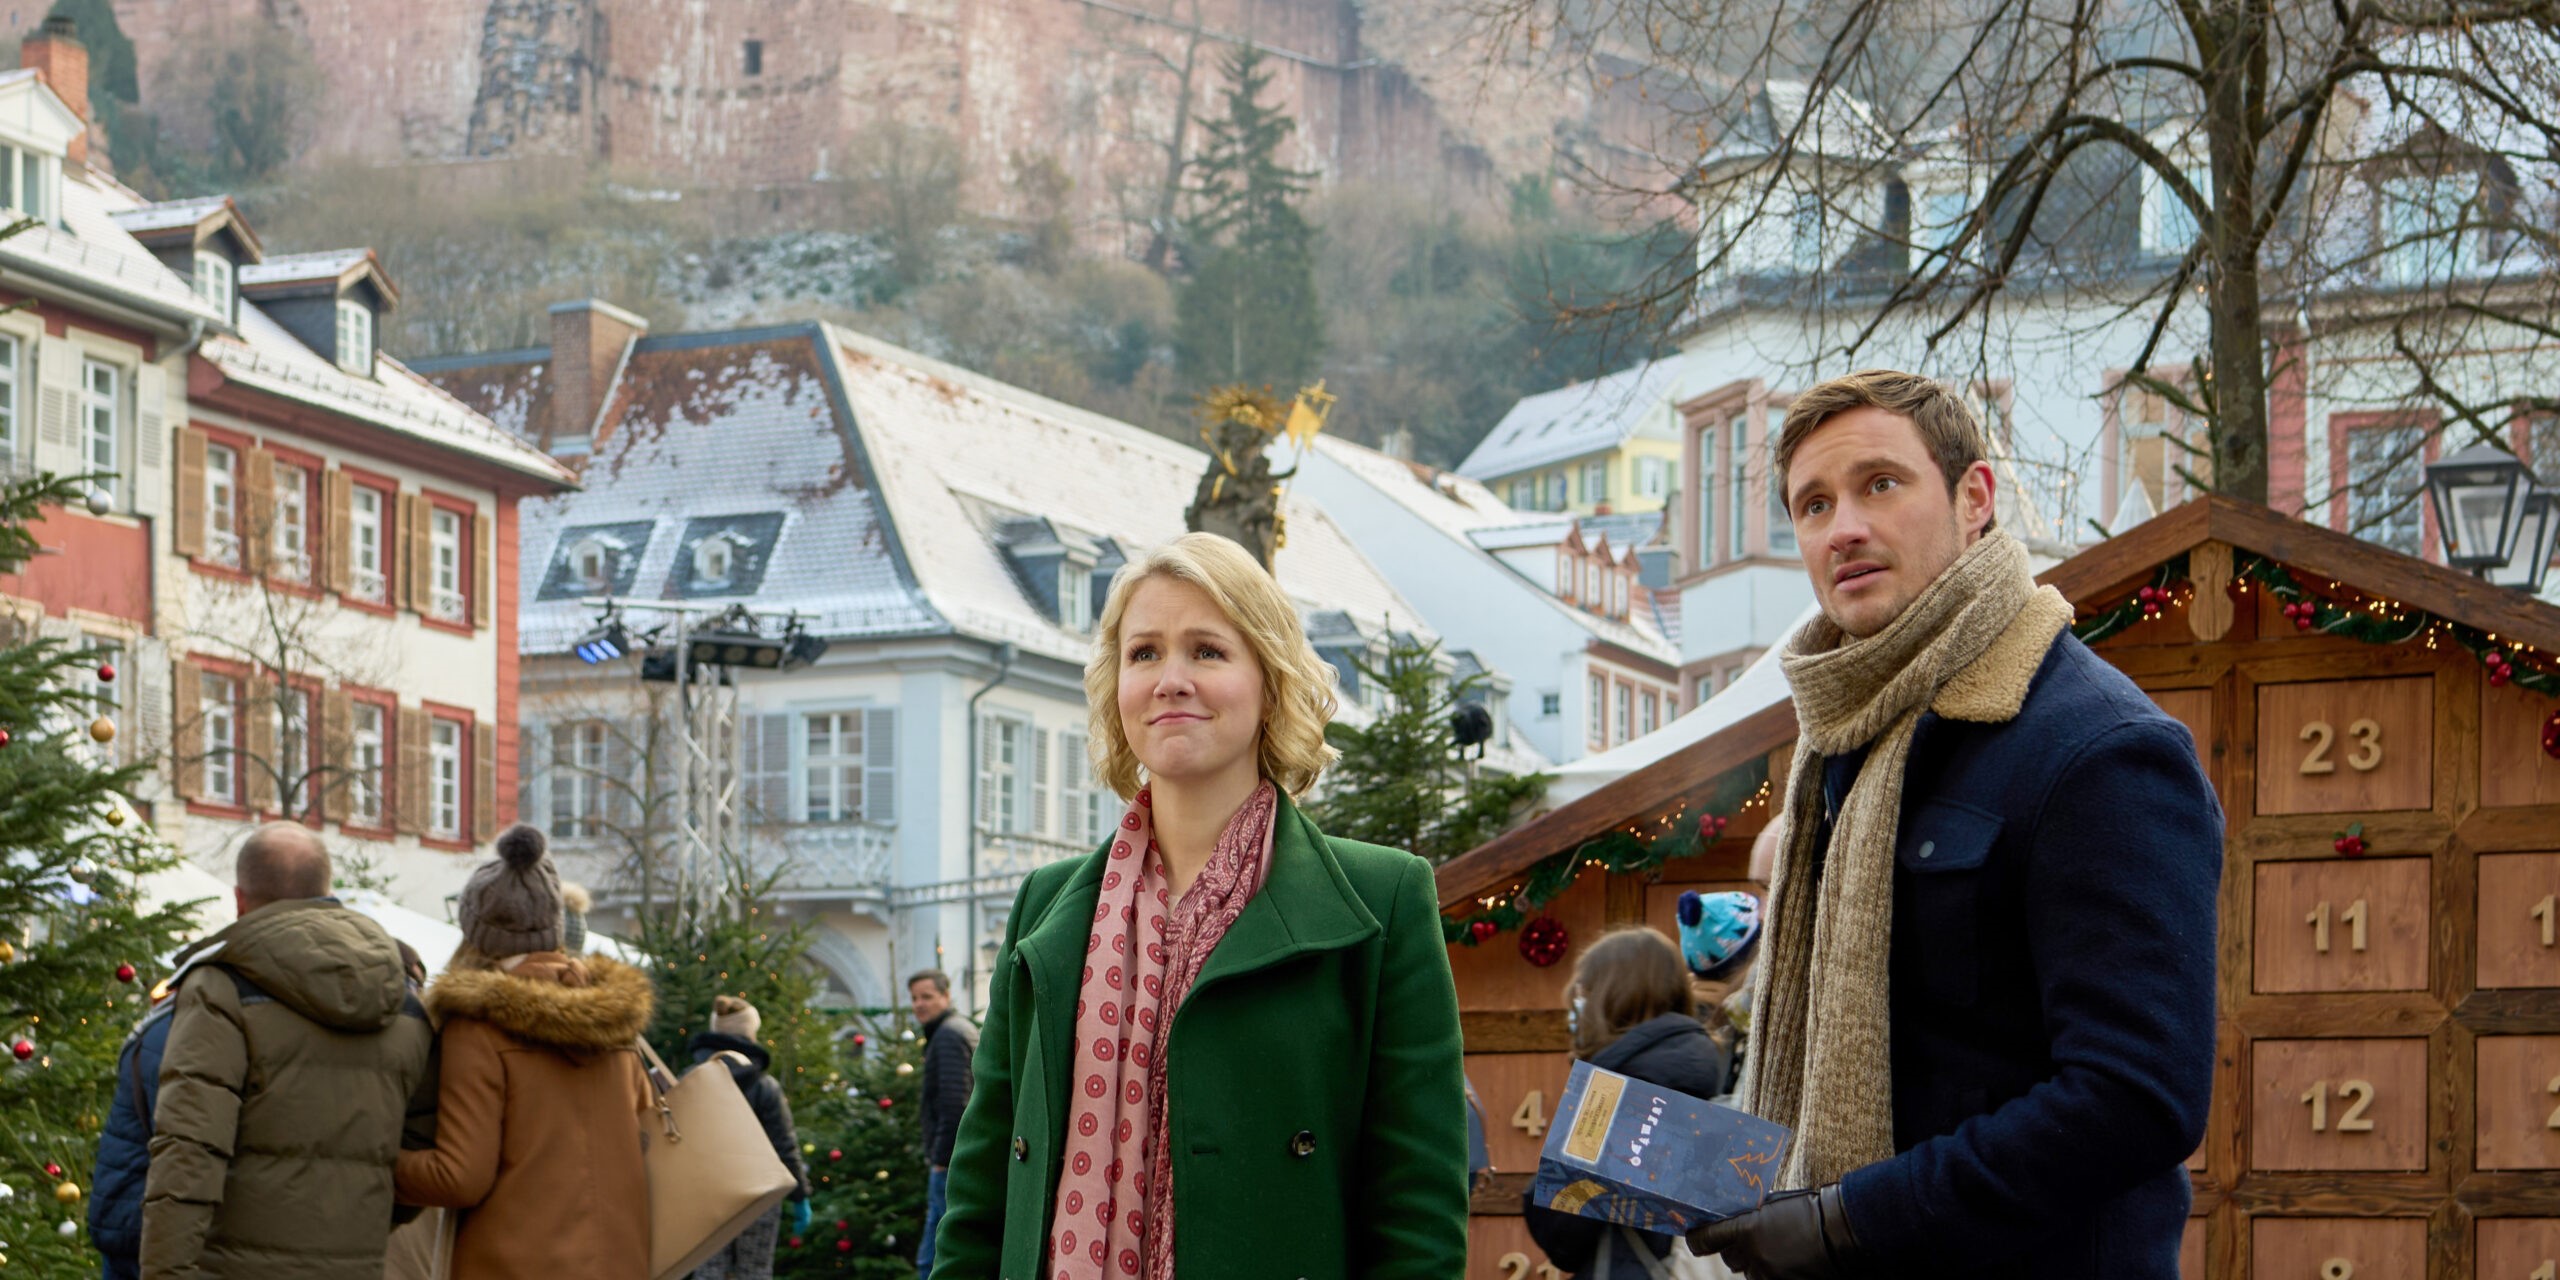 A Heidelberg Holiday Filming and Cast Details of the Hallmark